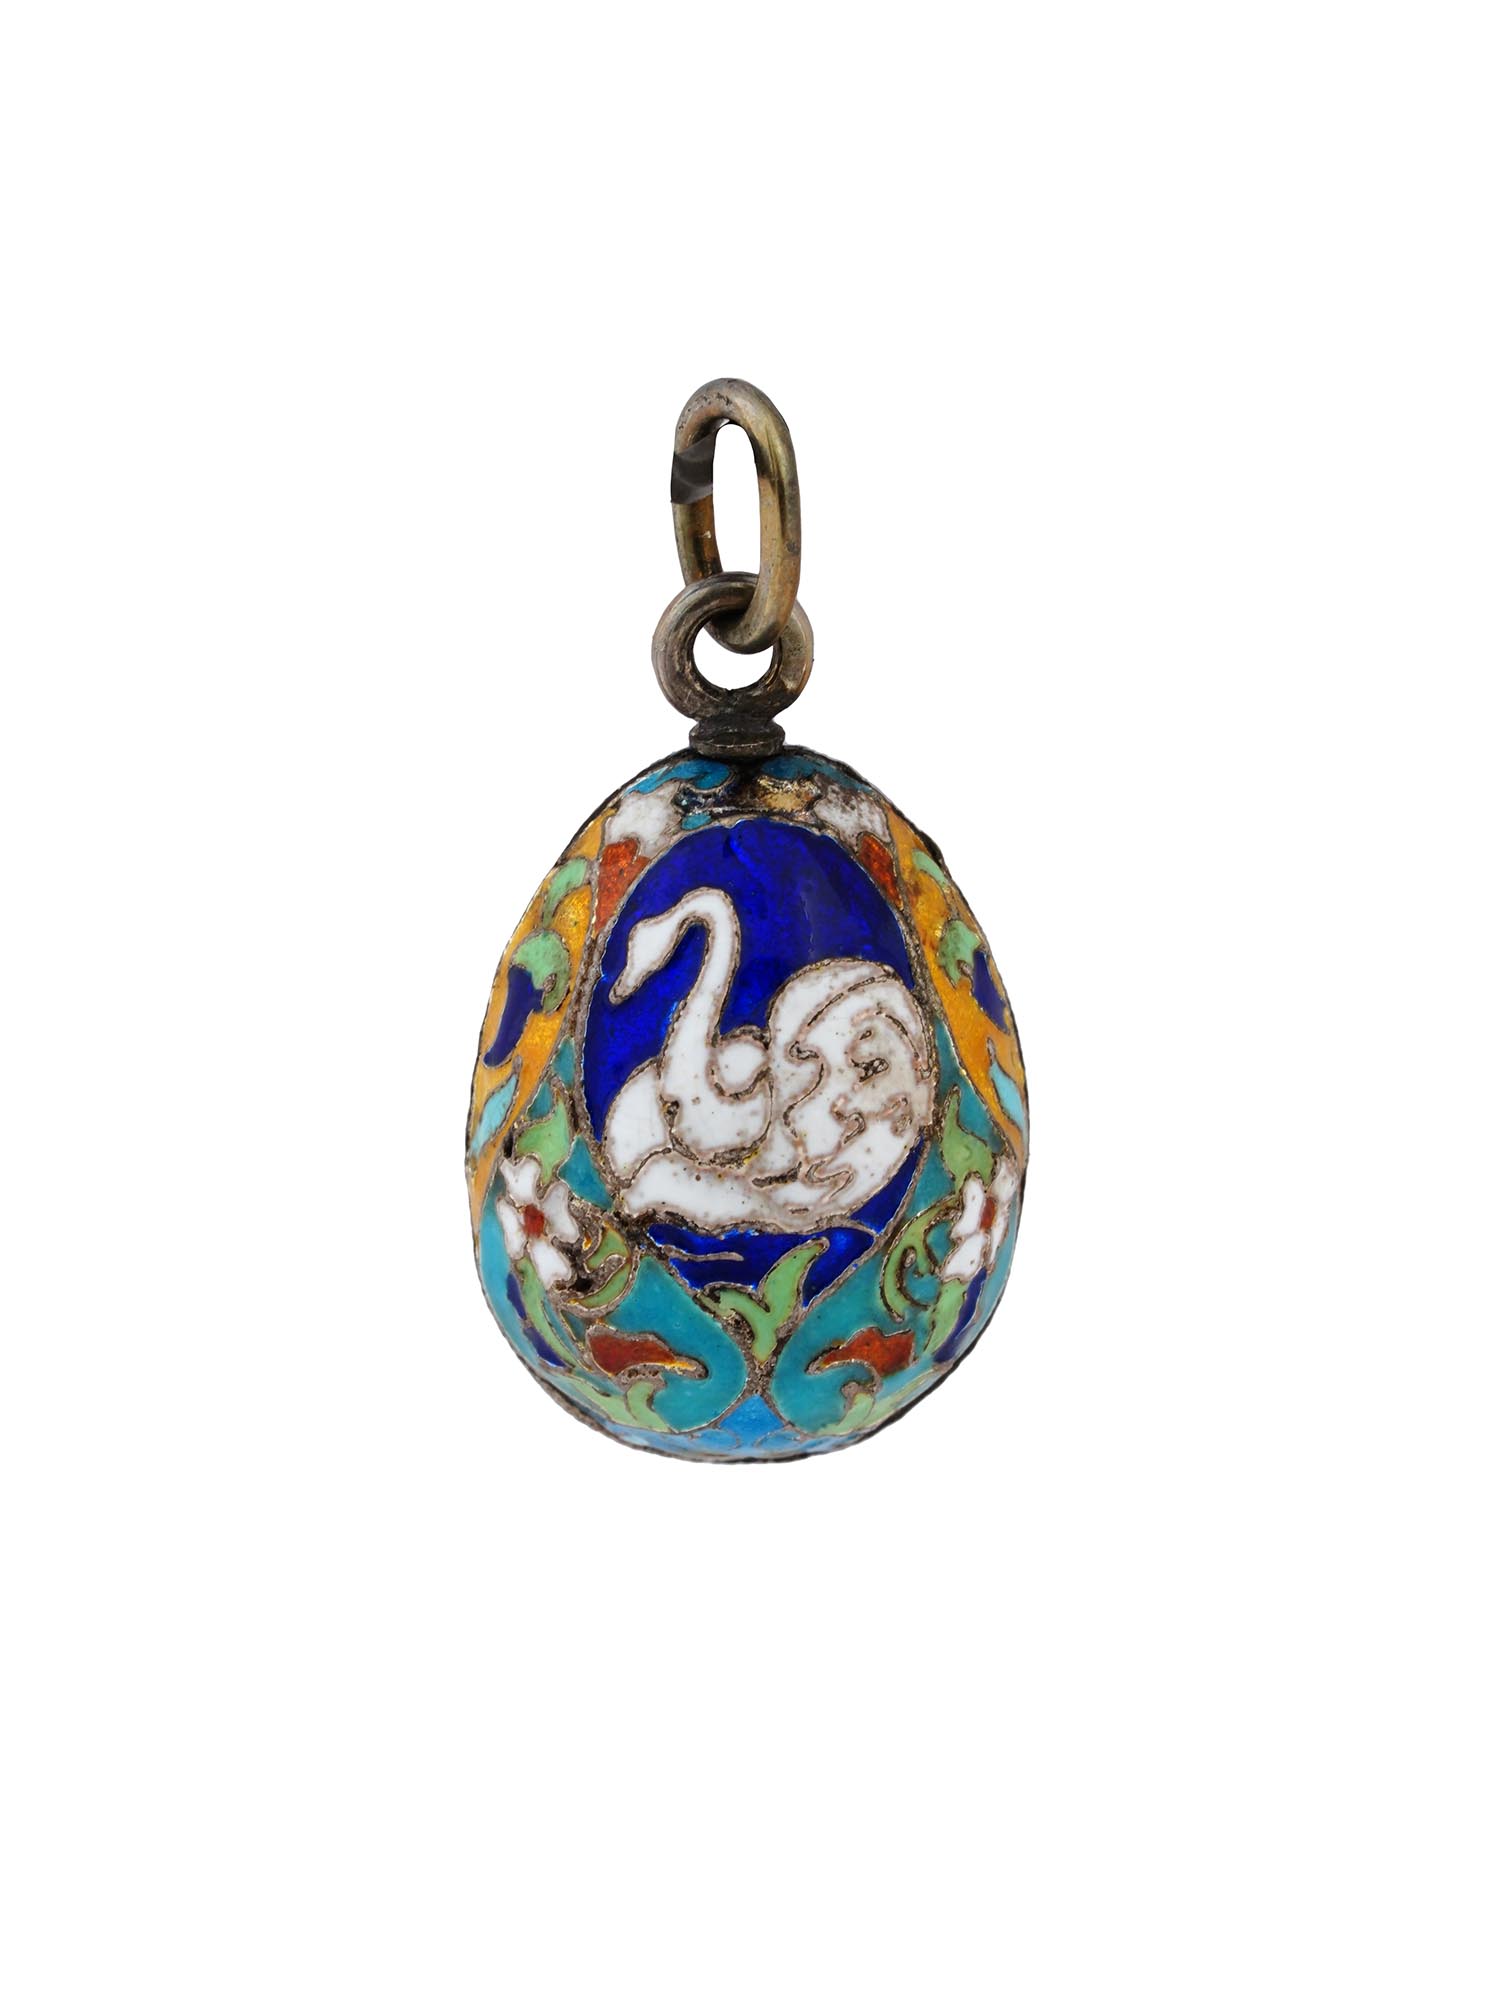 RUSSIAN GILT SILVER ENAMEL EGG PENDANT WITH SWAN PIC-0